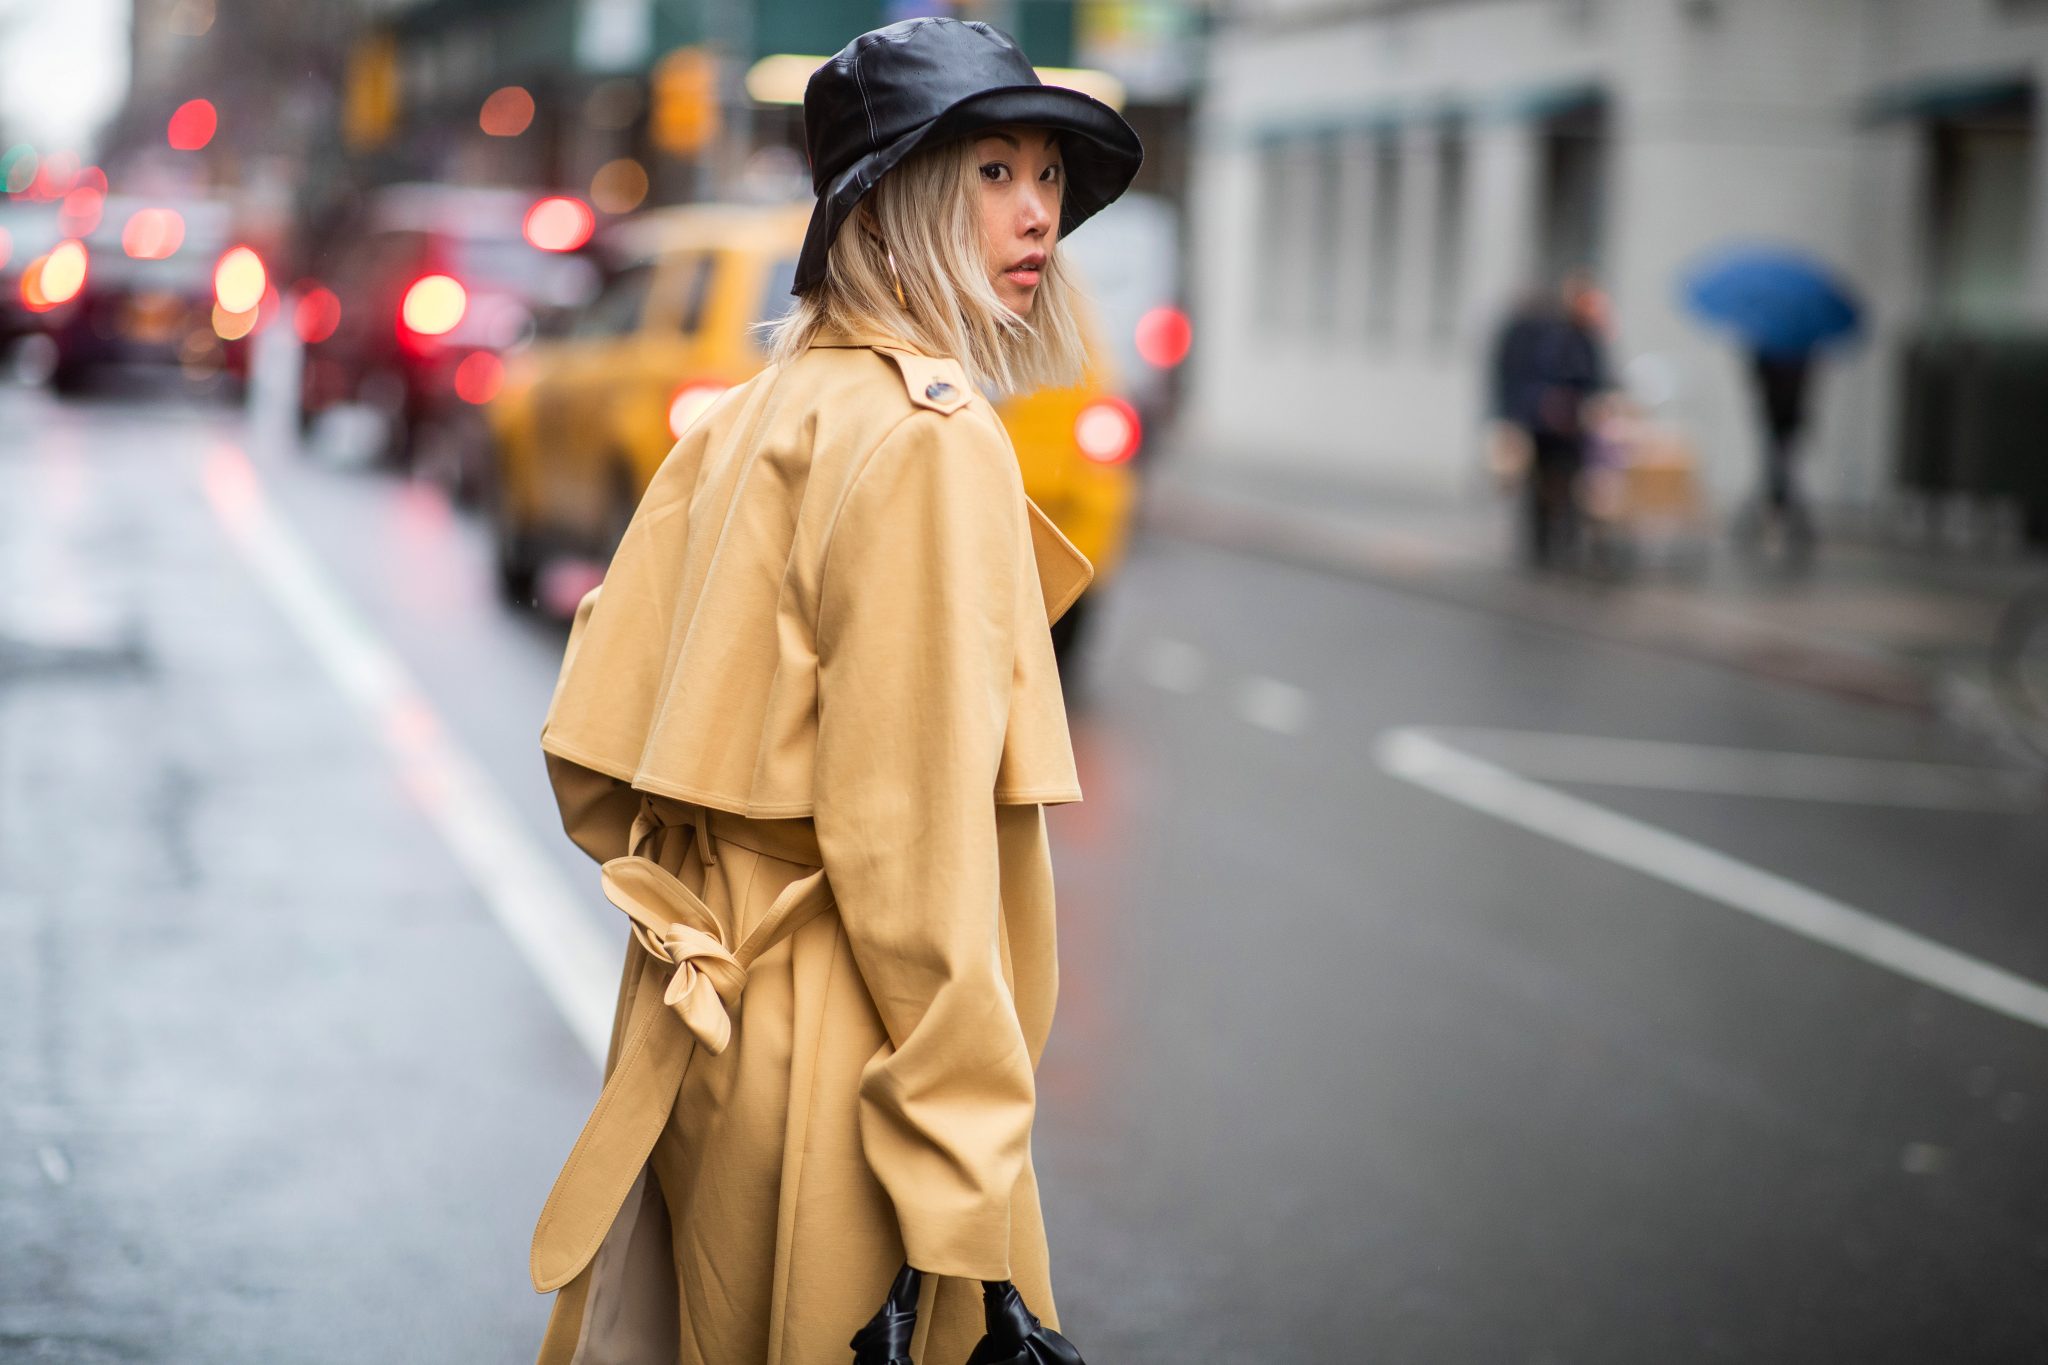 These are the hats, hairbands and scarves bossing New York street style